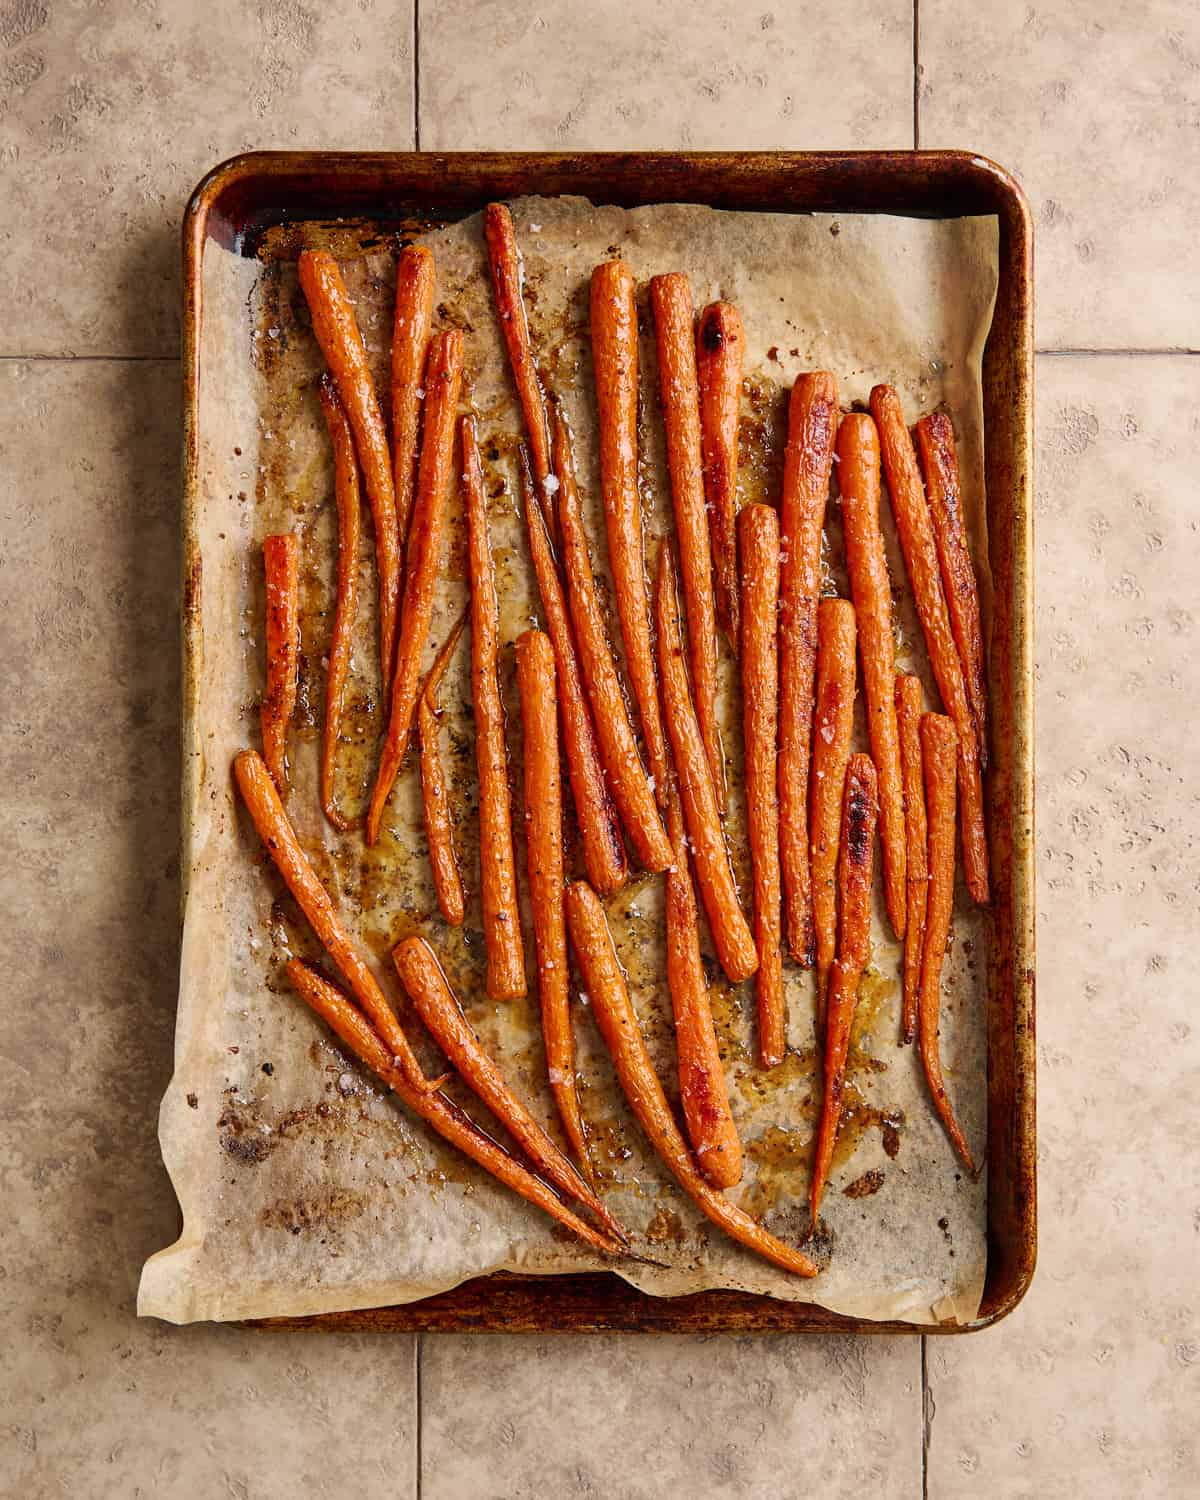 maple glazed carrots on a parchment paper lined sheet pan on a beige tiled surface.